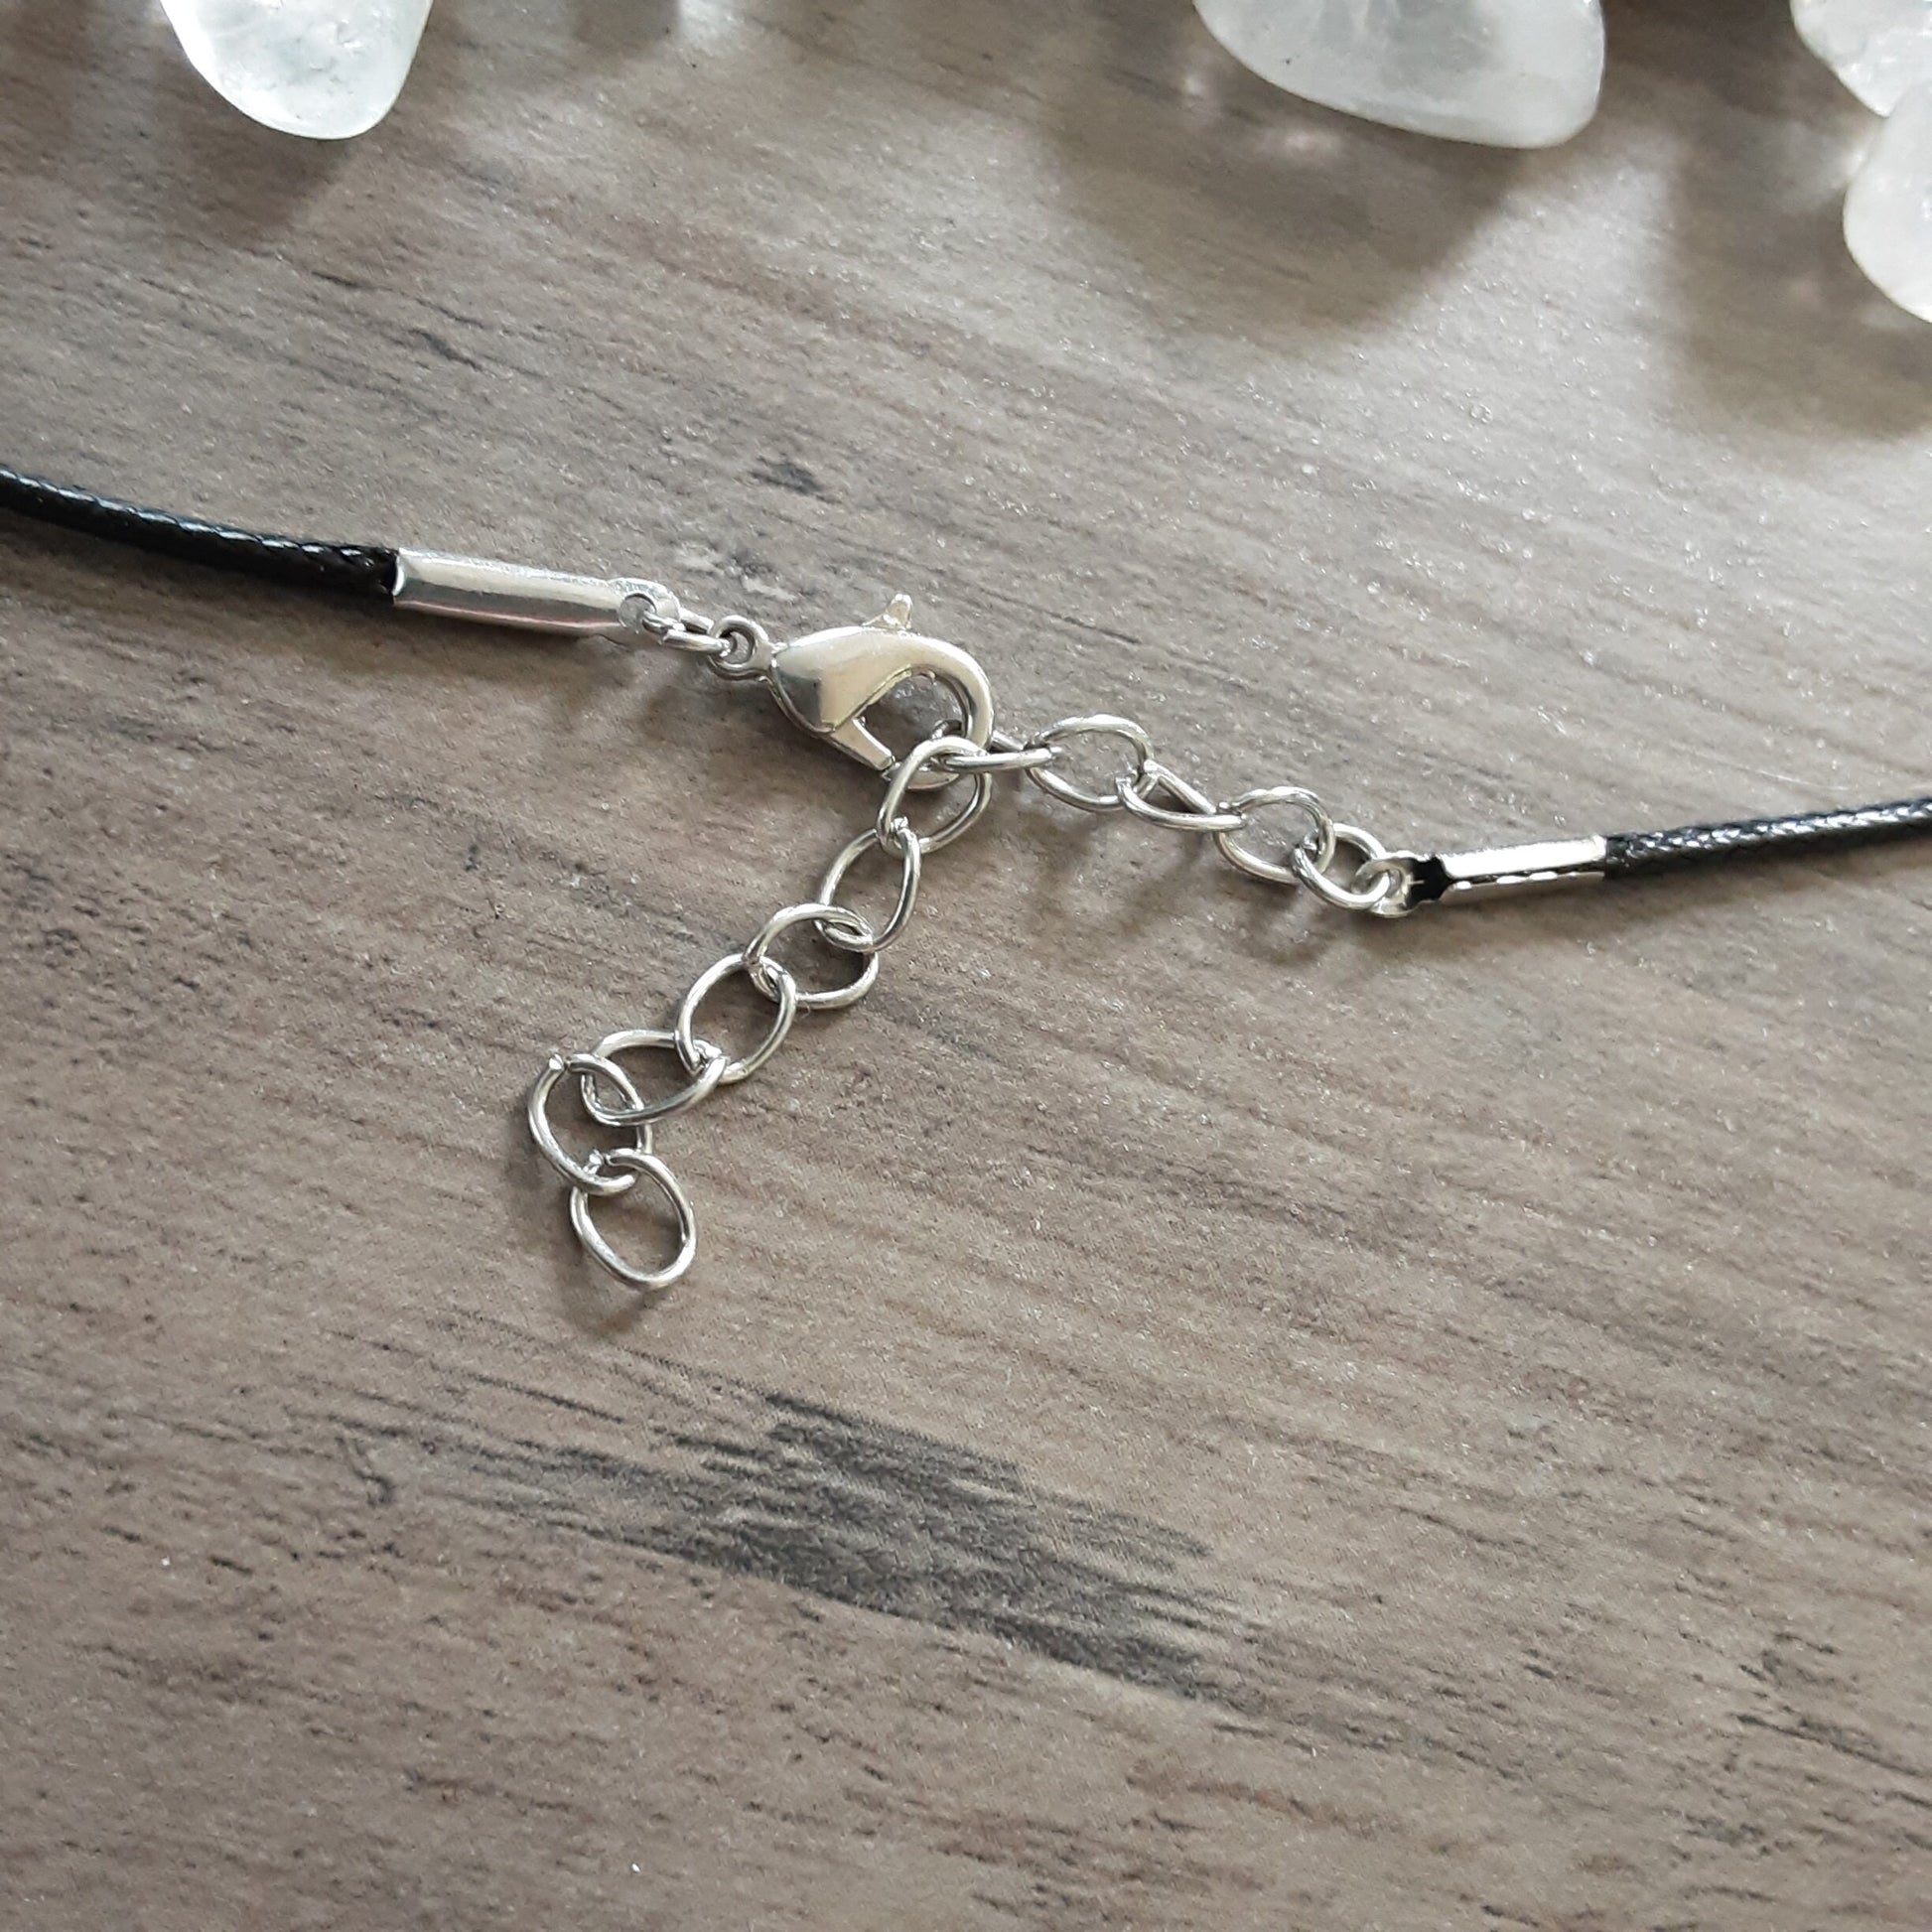 Lobster clasp and chain detailing on black cord necklace with clear Quartz tumbles and grey wooden background